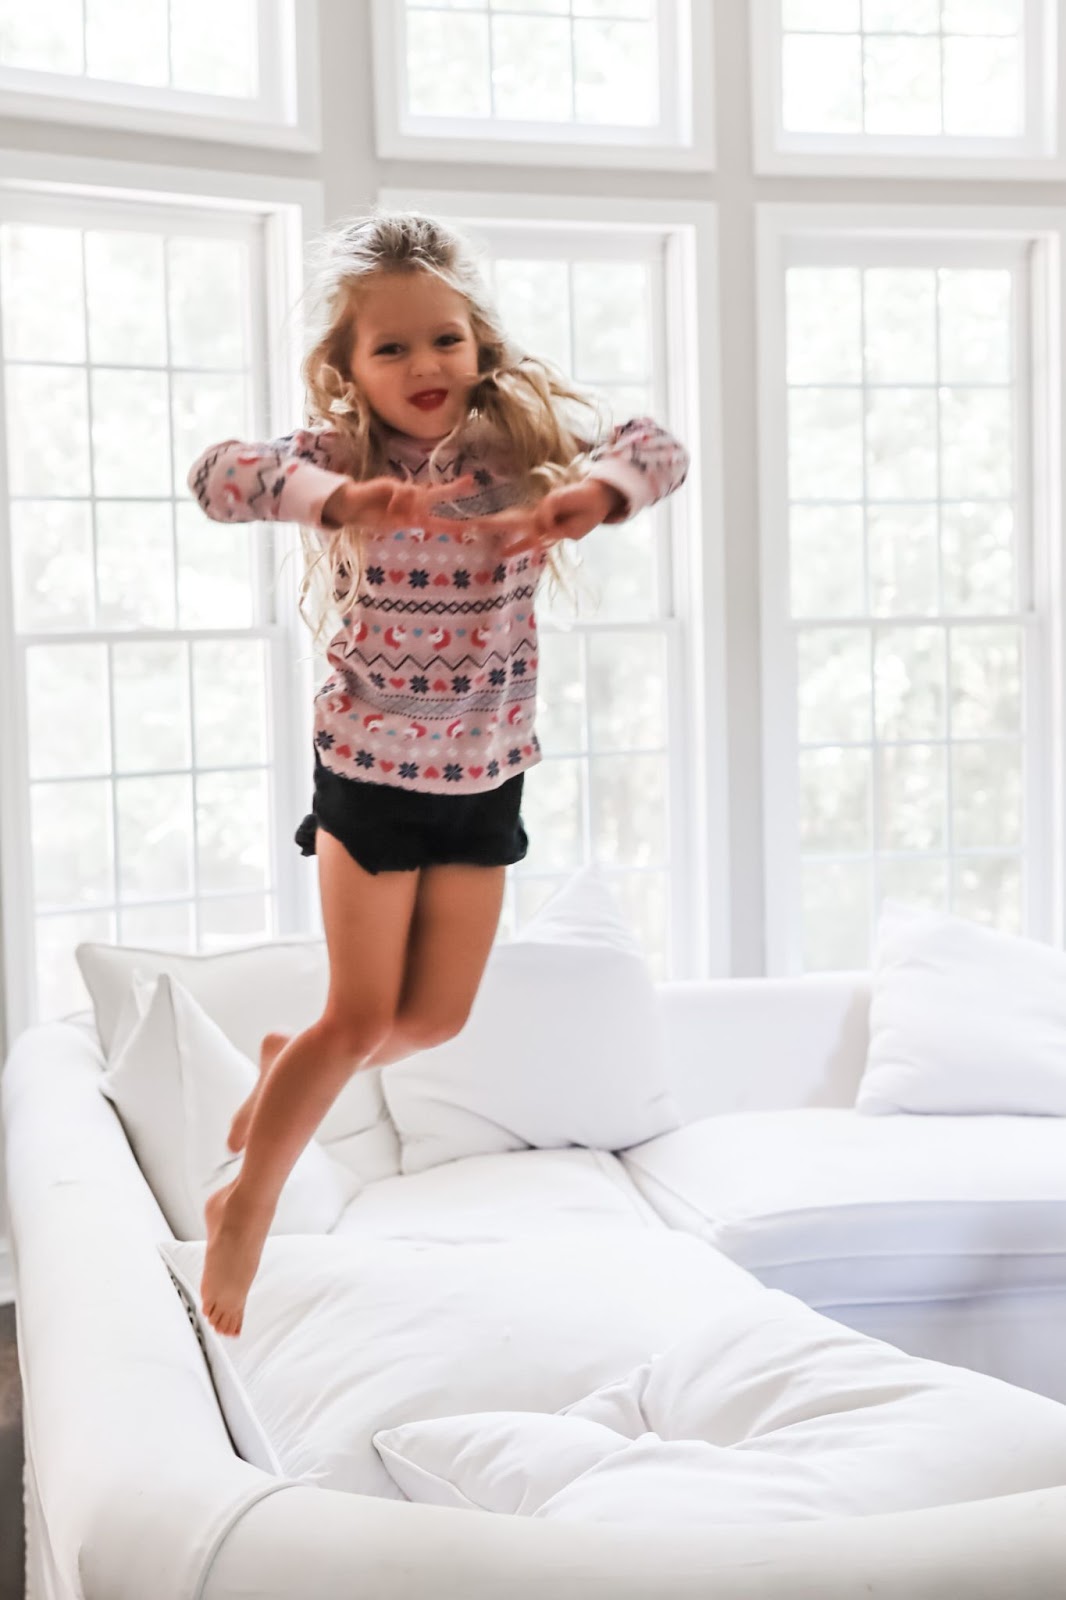 Medicine Cabinet Ideas by popular Atlanta lifestyle blog, City Peach: image of a little girl jumping on a white sectional couch.